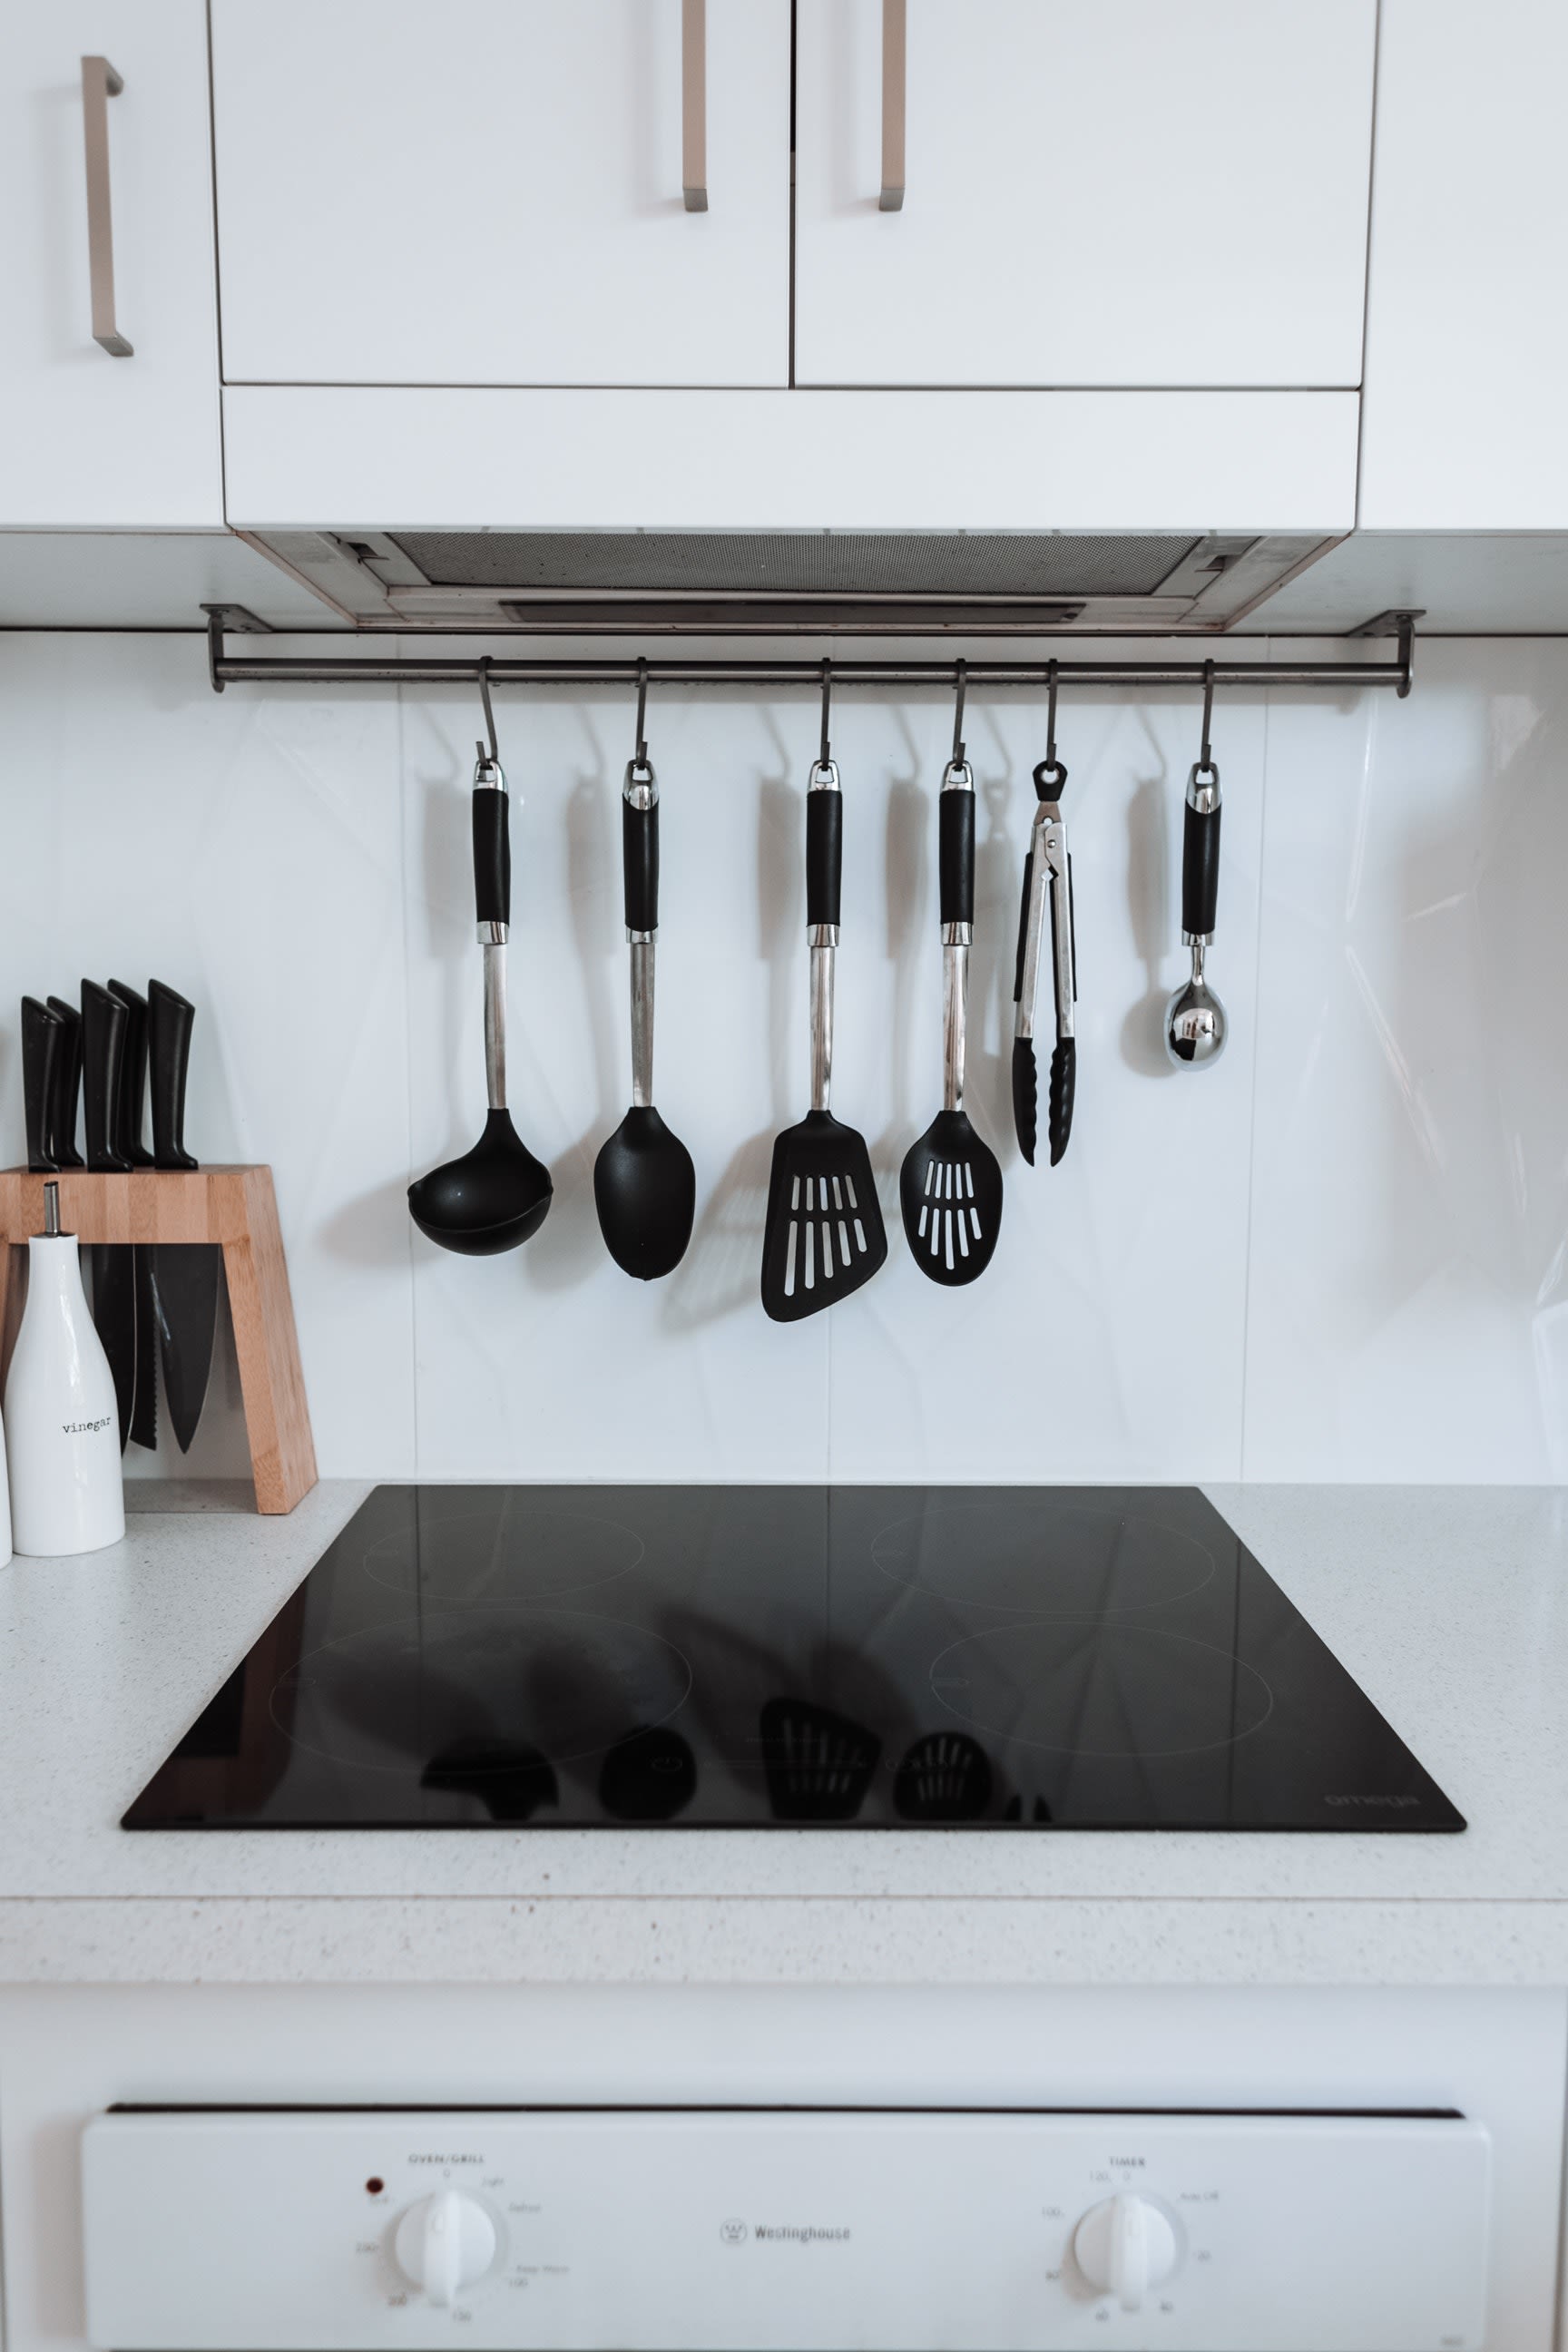 4 Things to Know Before Buying an Induction or Electric Cooktop - Wildgrid Home